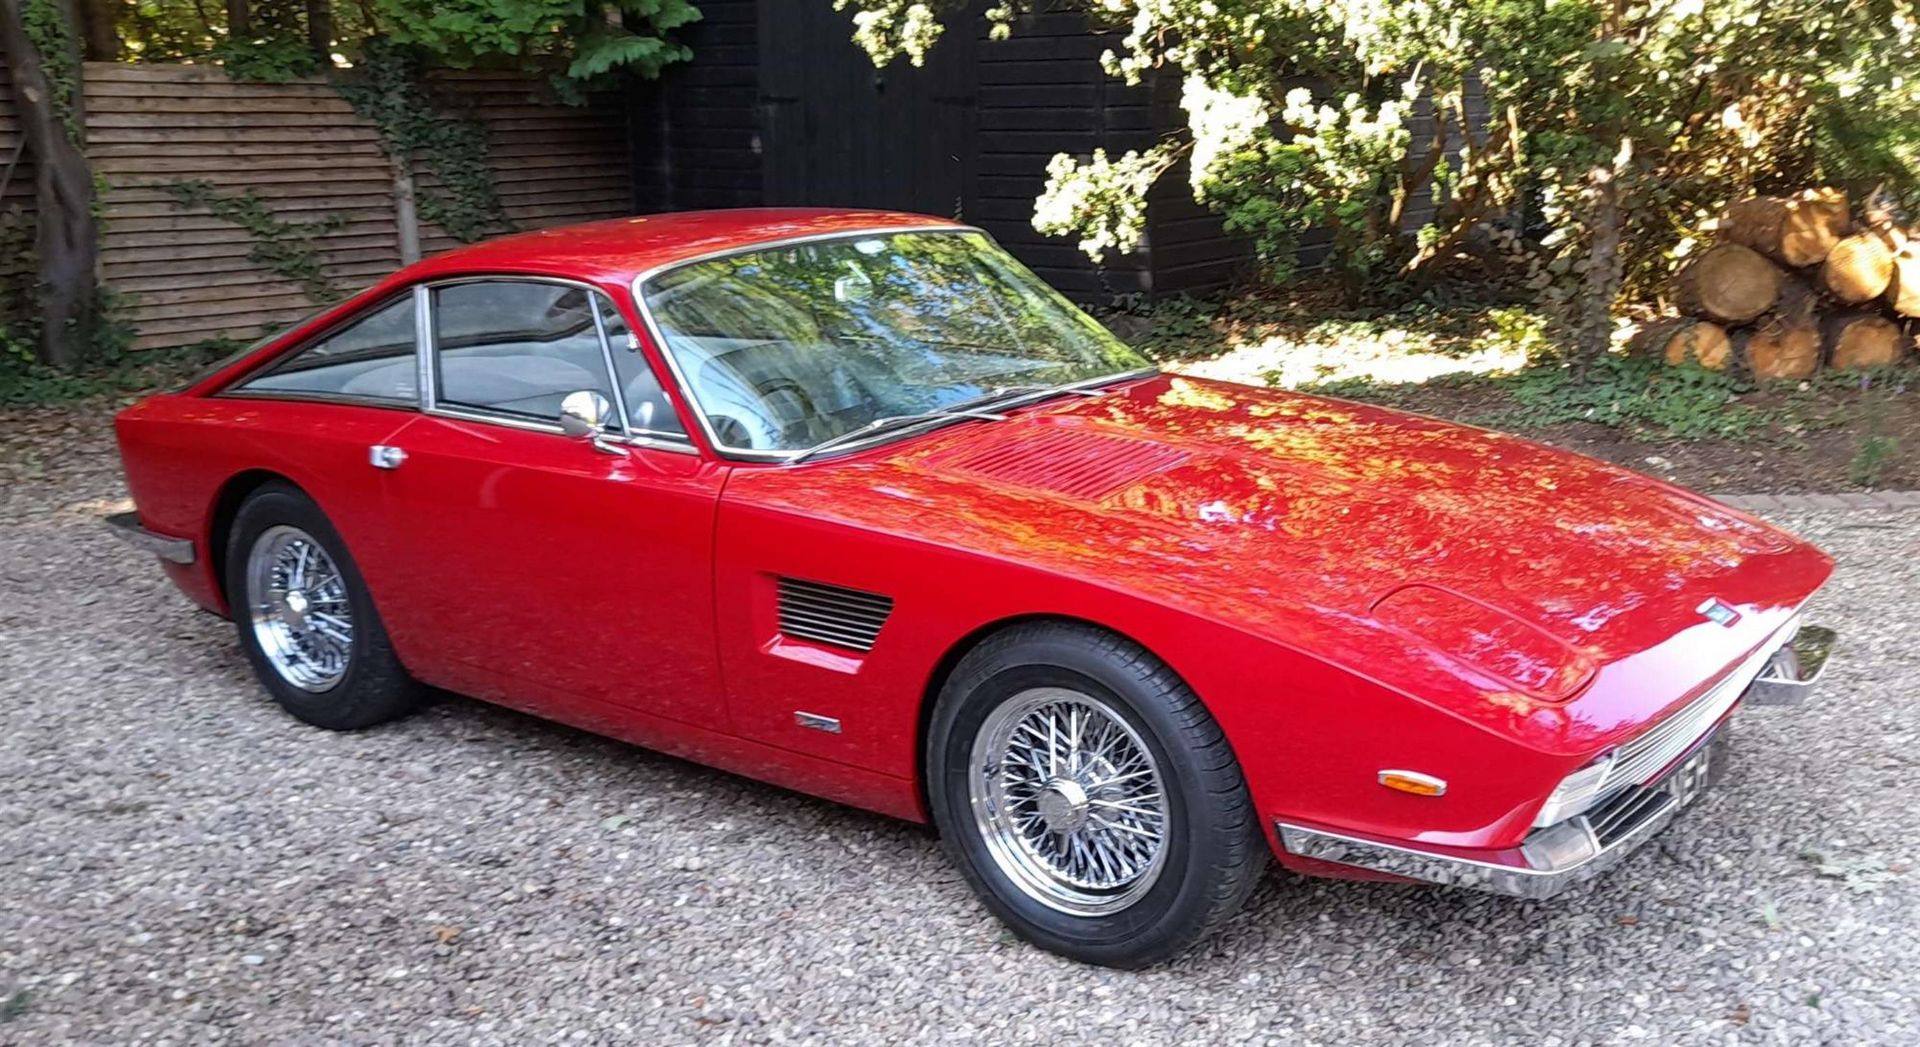 1965 TVR Trident - Image 11 of 11